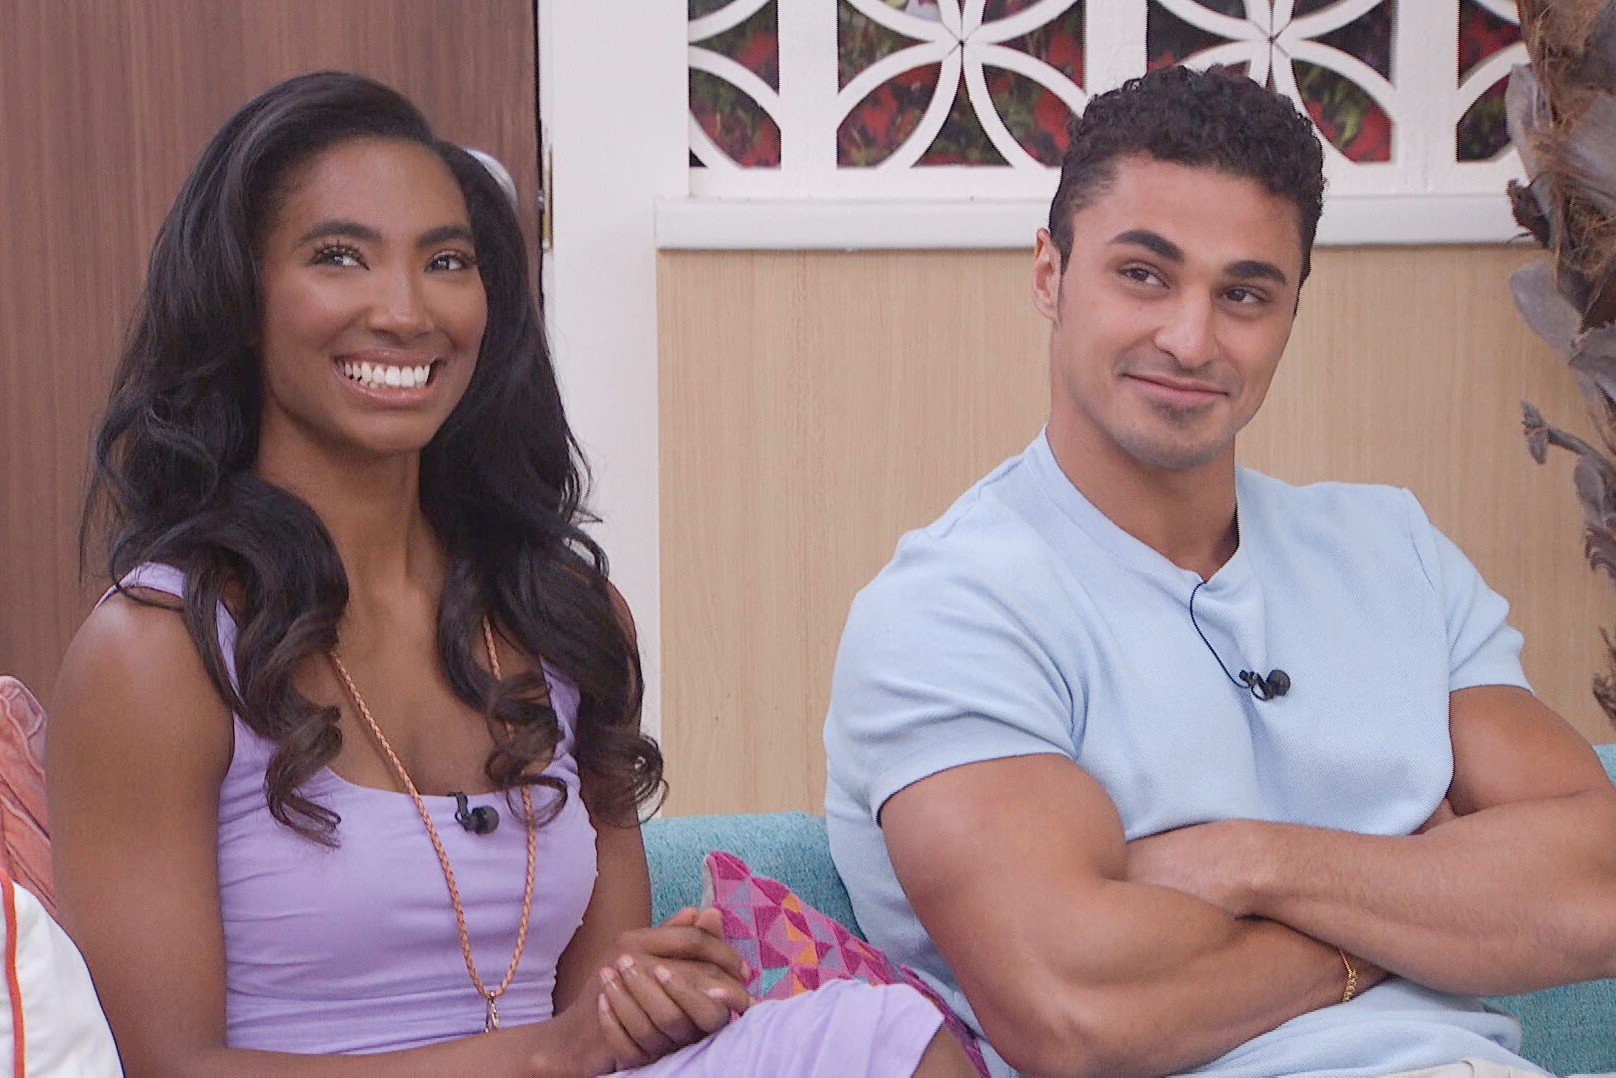 Taylor Hale and Joseph Abdin, who starred in 'Big Brother 24' on CBS, sit next to one another on a couch. Taylor wears a light purple dress. Joseph wears a light blue shirt.